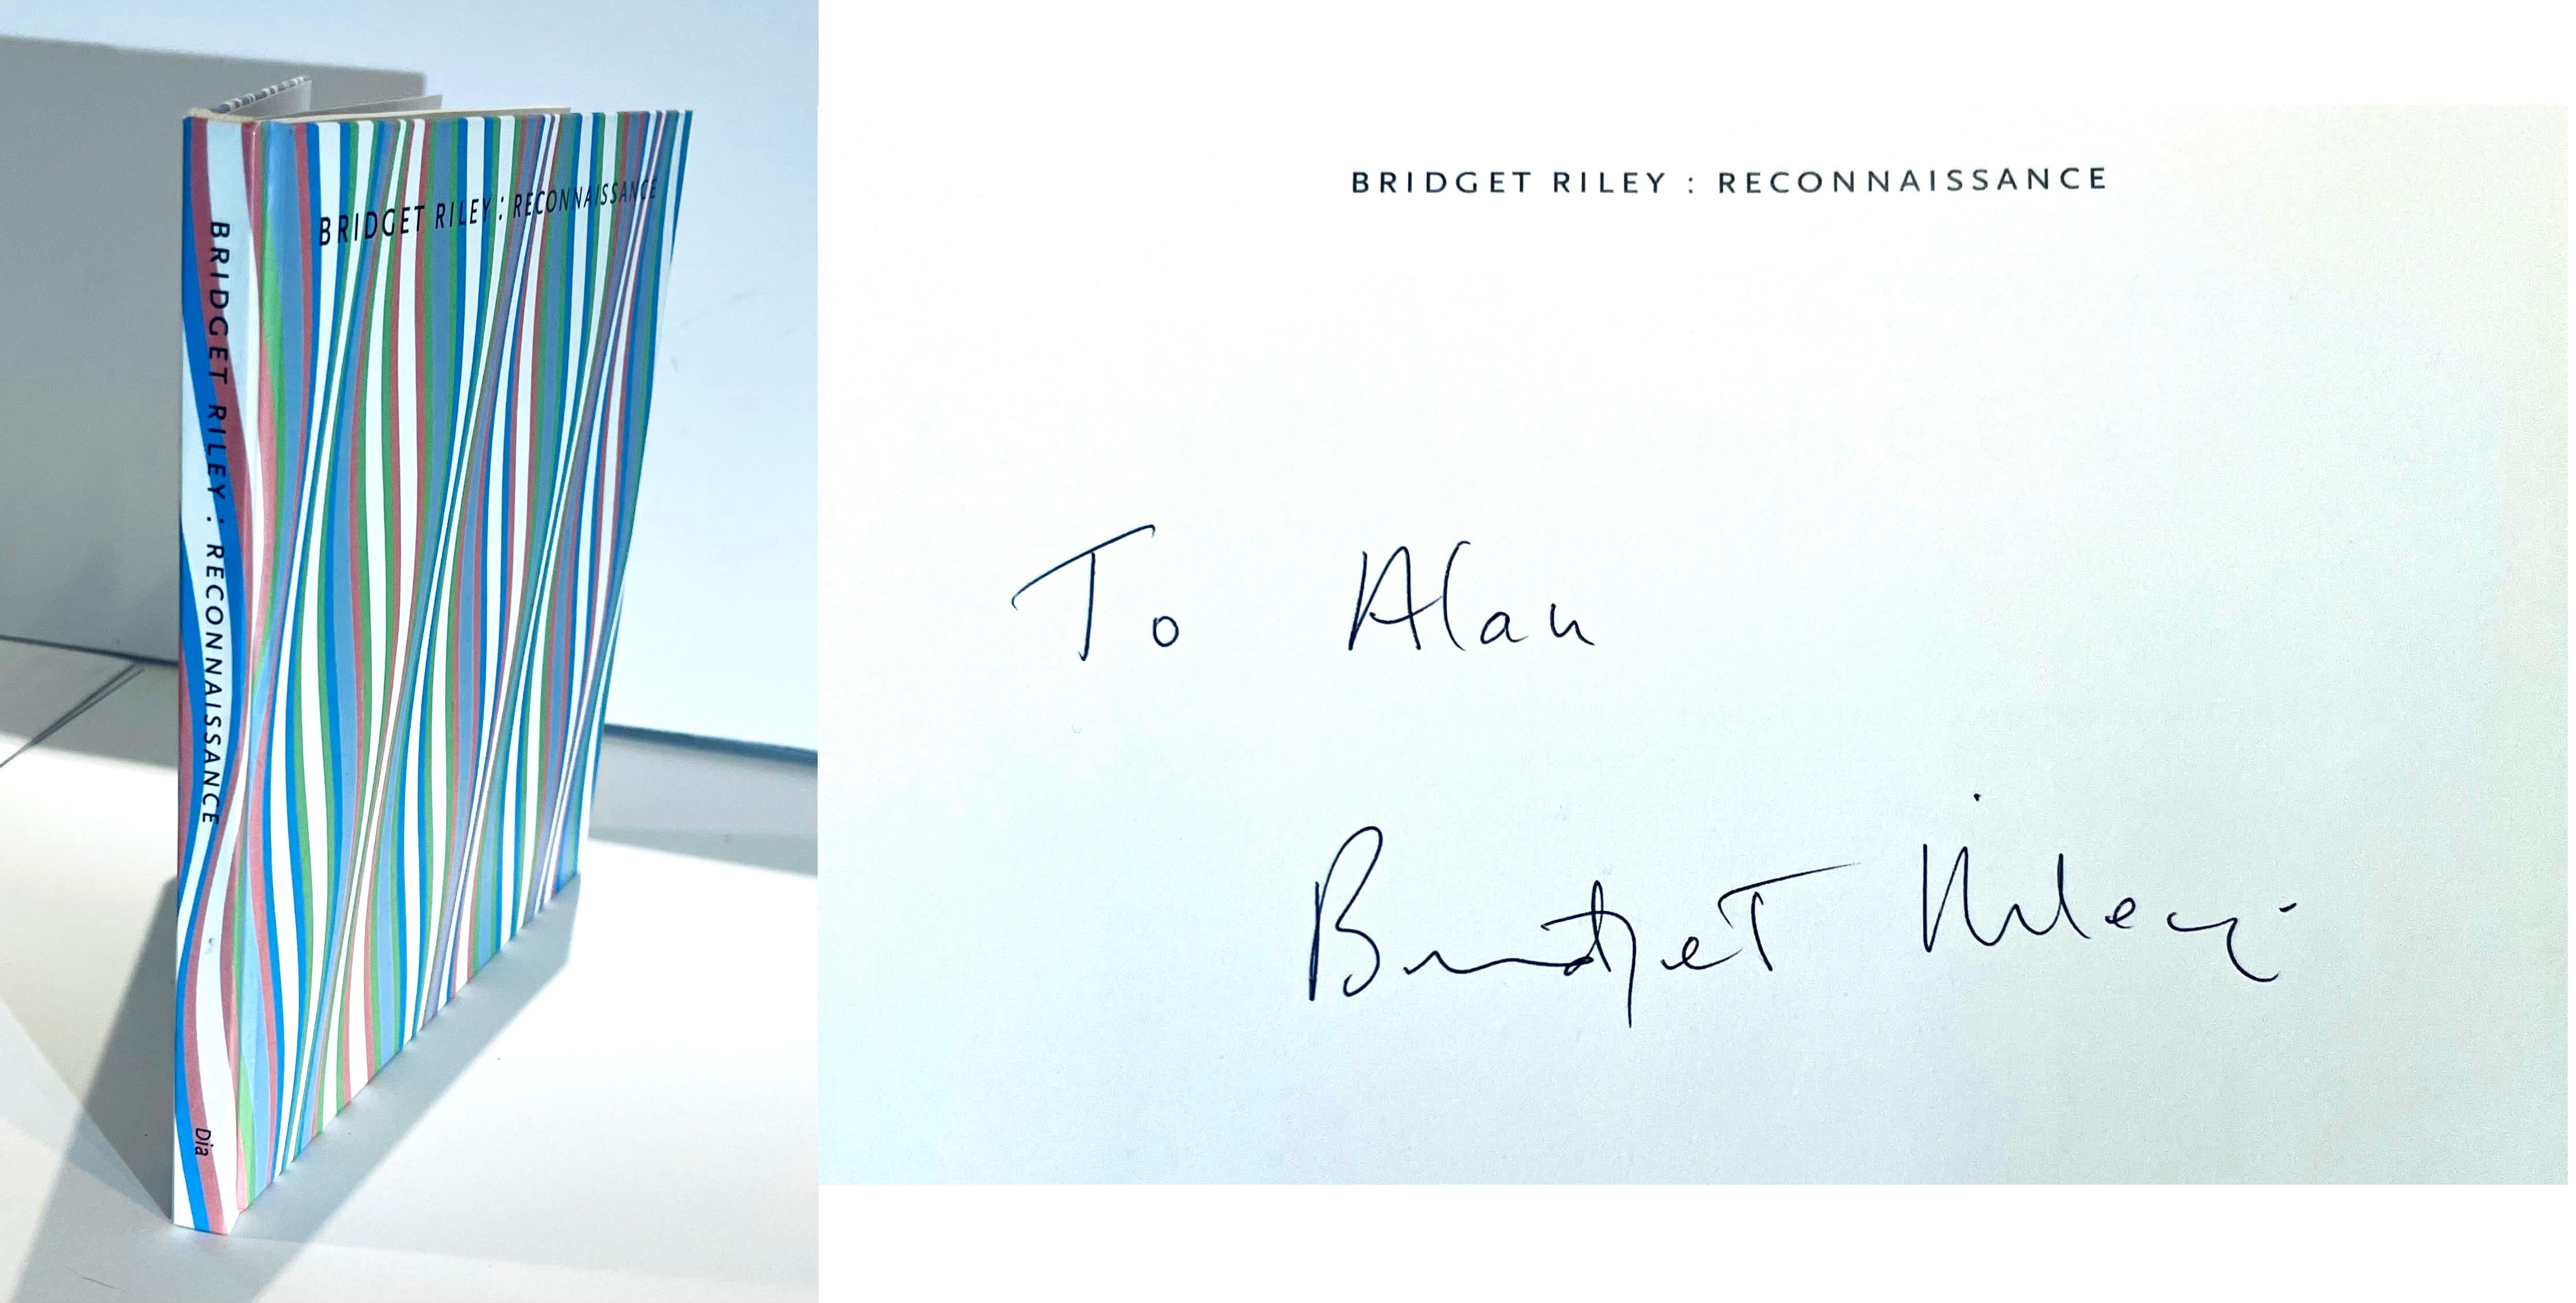 Bridget Riley: Reconnaissance (hand signed and inscribed by Bridget Riley), 2001
Hardback monograph with no dust jacket as issued (hand signed and inscribed)
Hand signed and inscribed to Alan
9 1/2 × 8 1/2 × 1 inches

This hardback monograph with